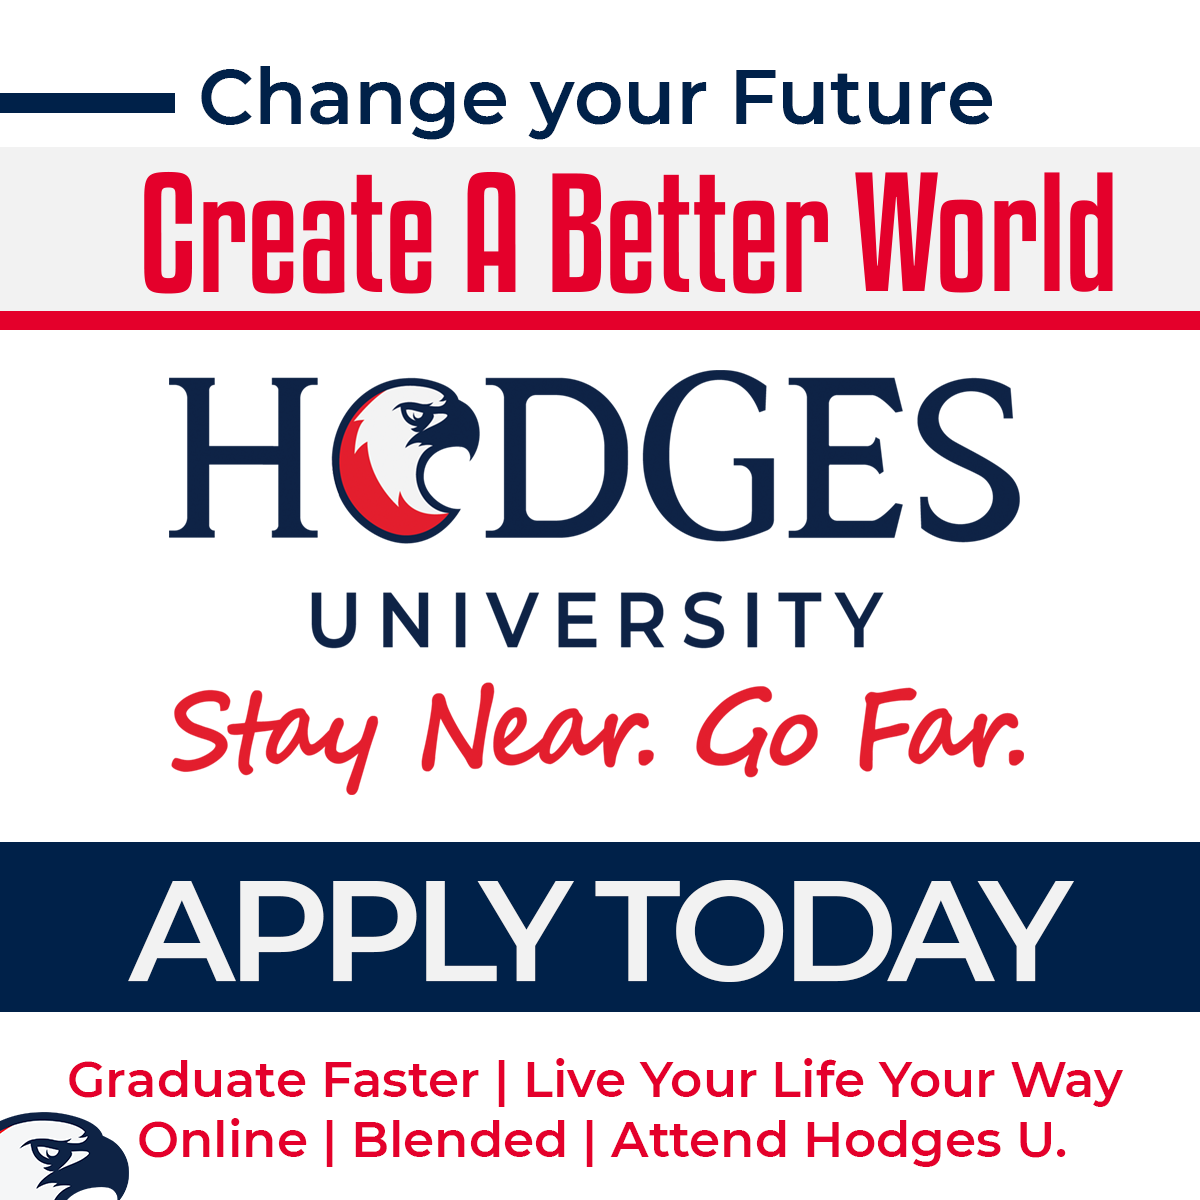 Create a better world starting at Hodges U